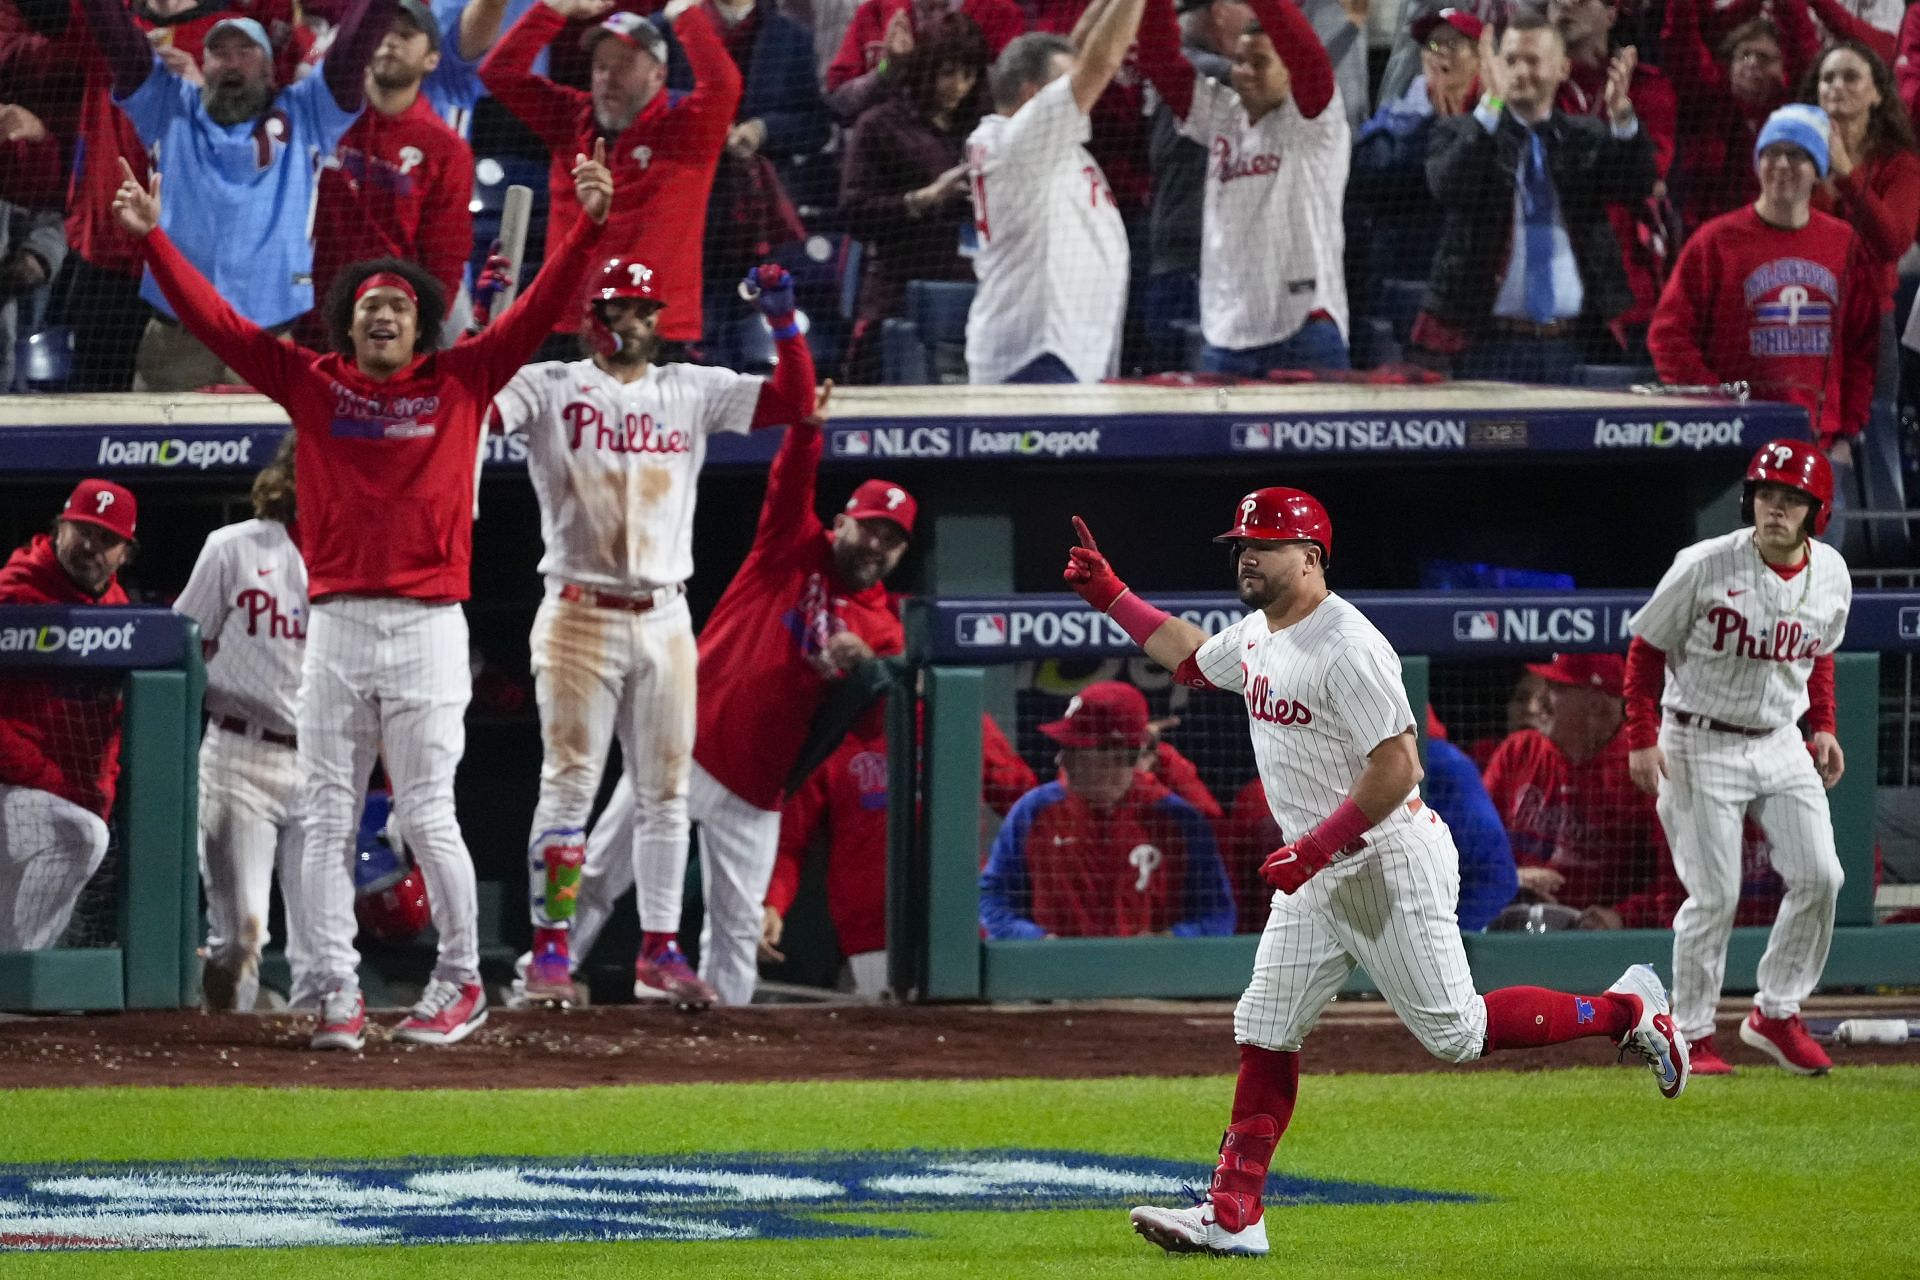 The Philadelphia Phillies look incredible right now